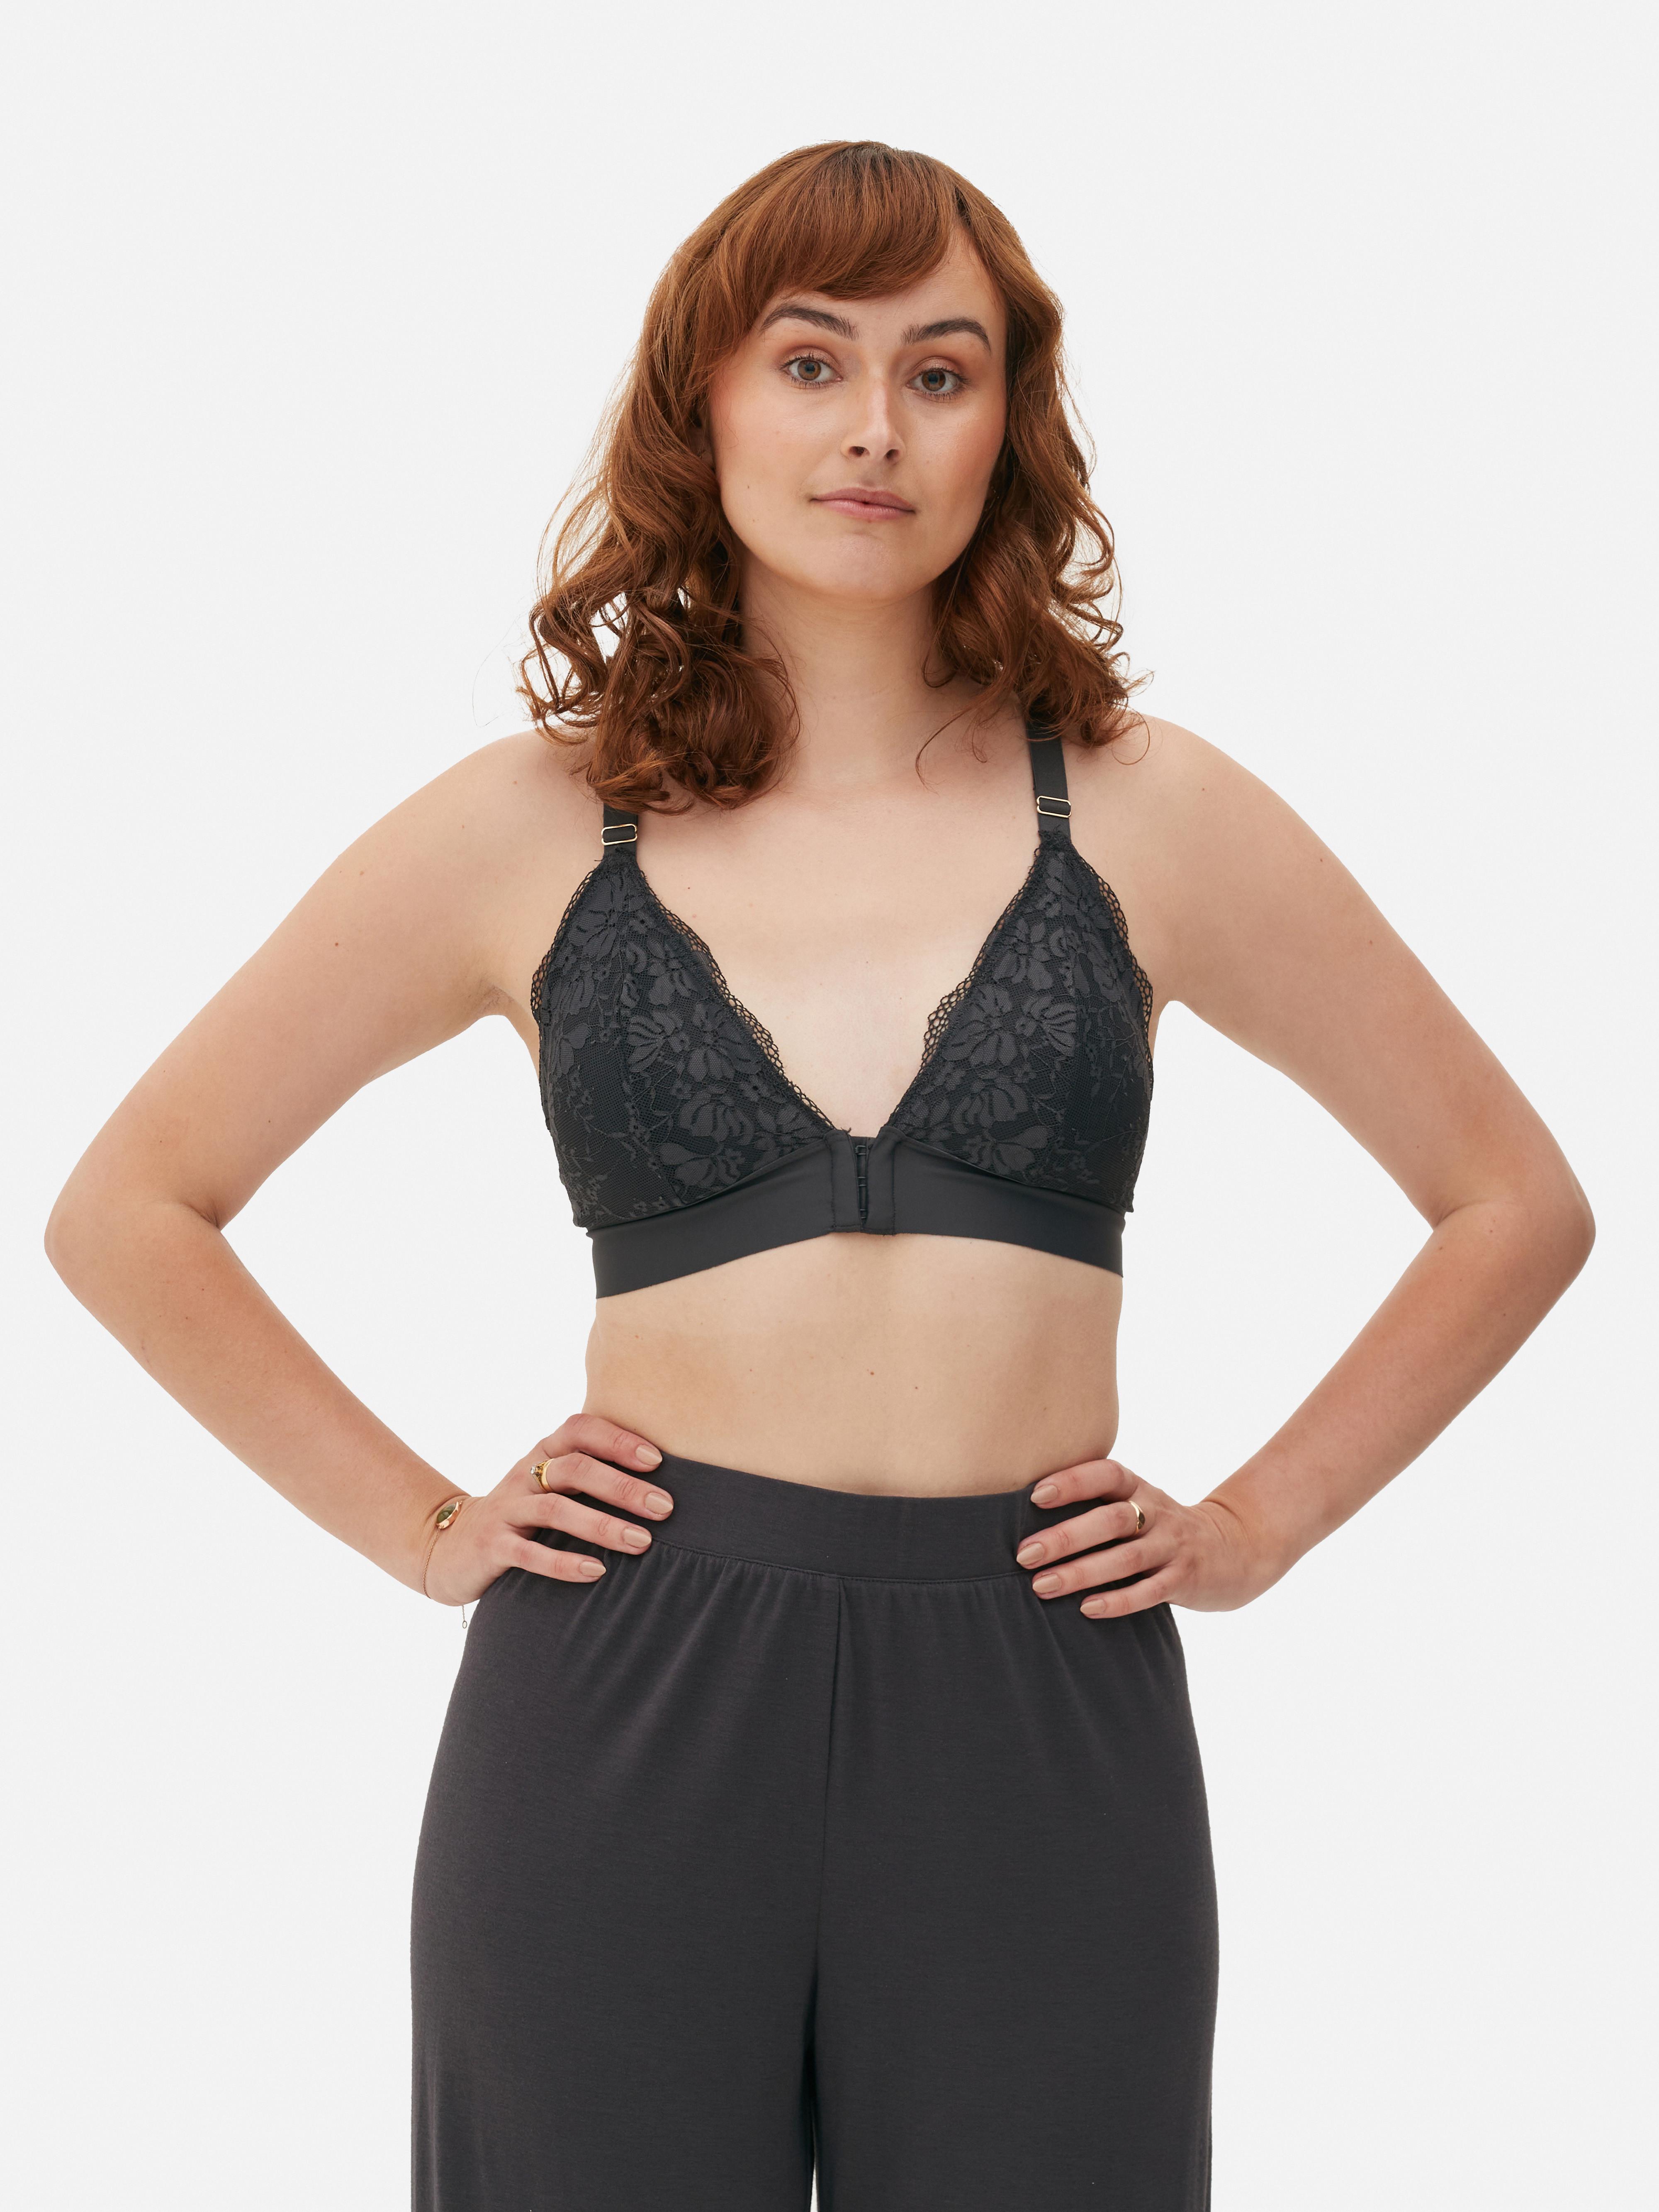 Primark - We 󾬑 a little bit of lace! Bralette £4/€6 (with